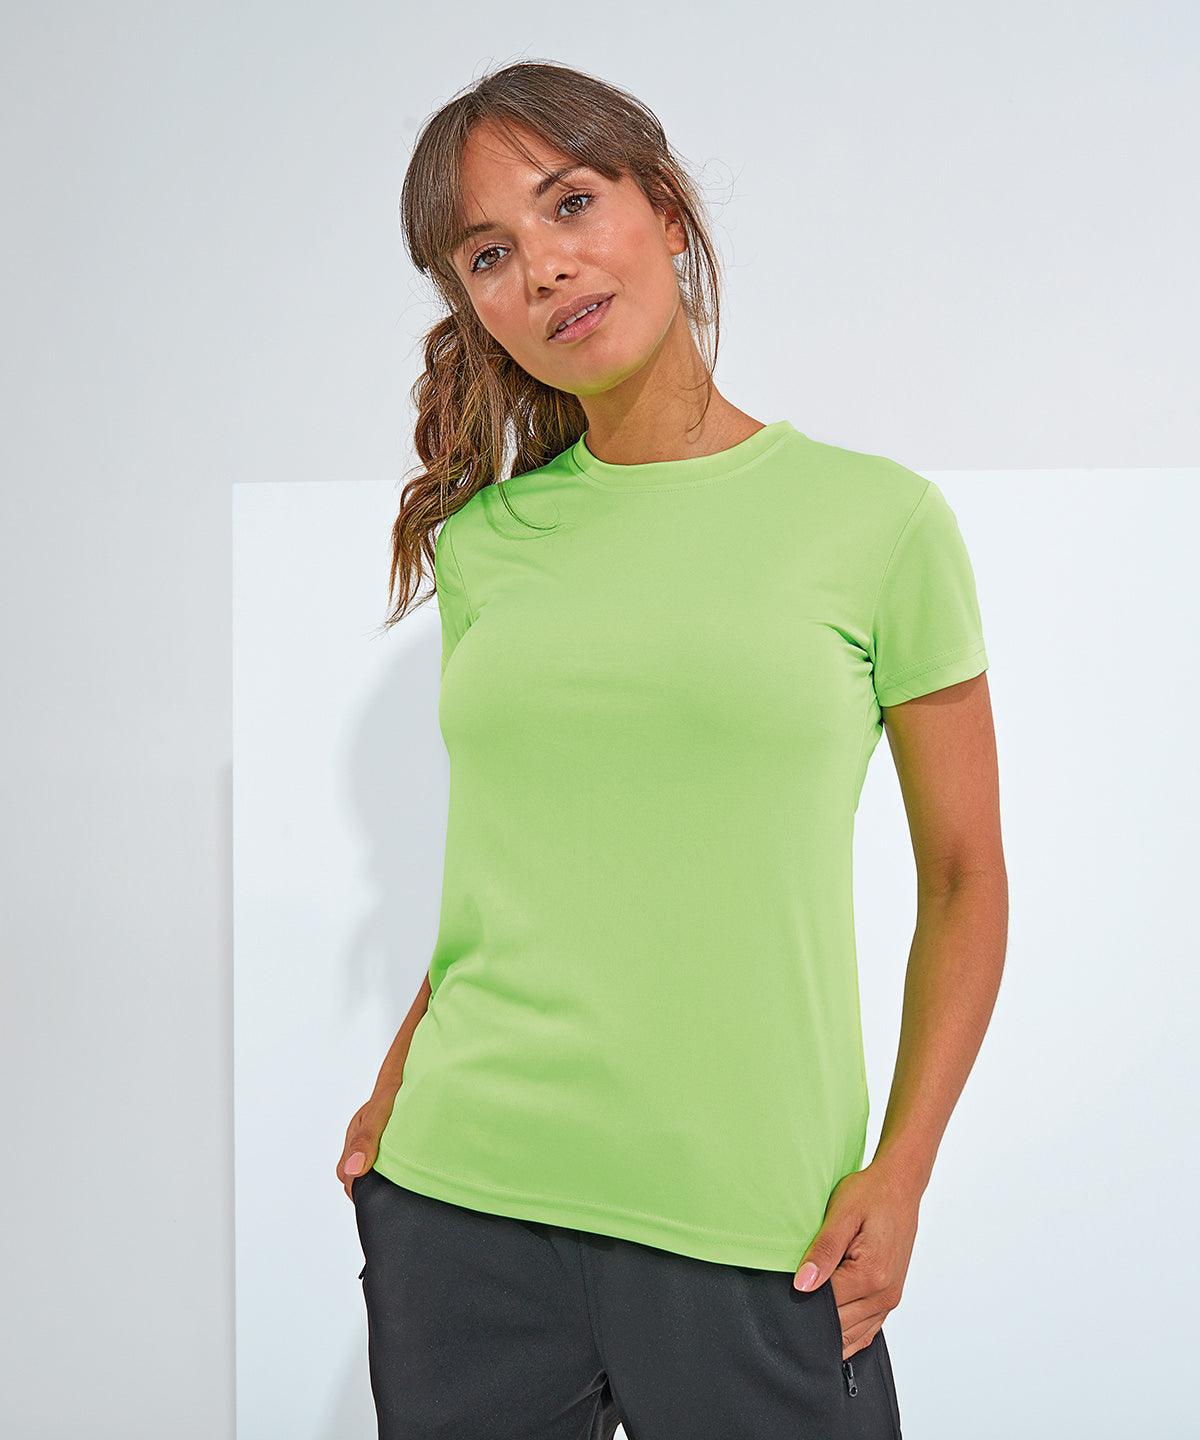 White - Women's TriDri® recycled performance t-shirt T-Shirts TriDri® Activewear & Performance, Back to the Gym, Exclusives, New Styles For 2022, Organic & Conscious, Women's Fashion Schoolwear Centres